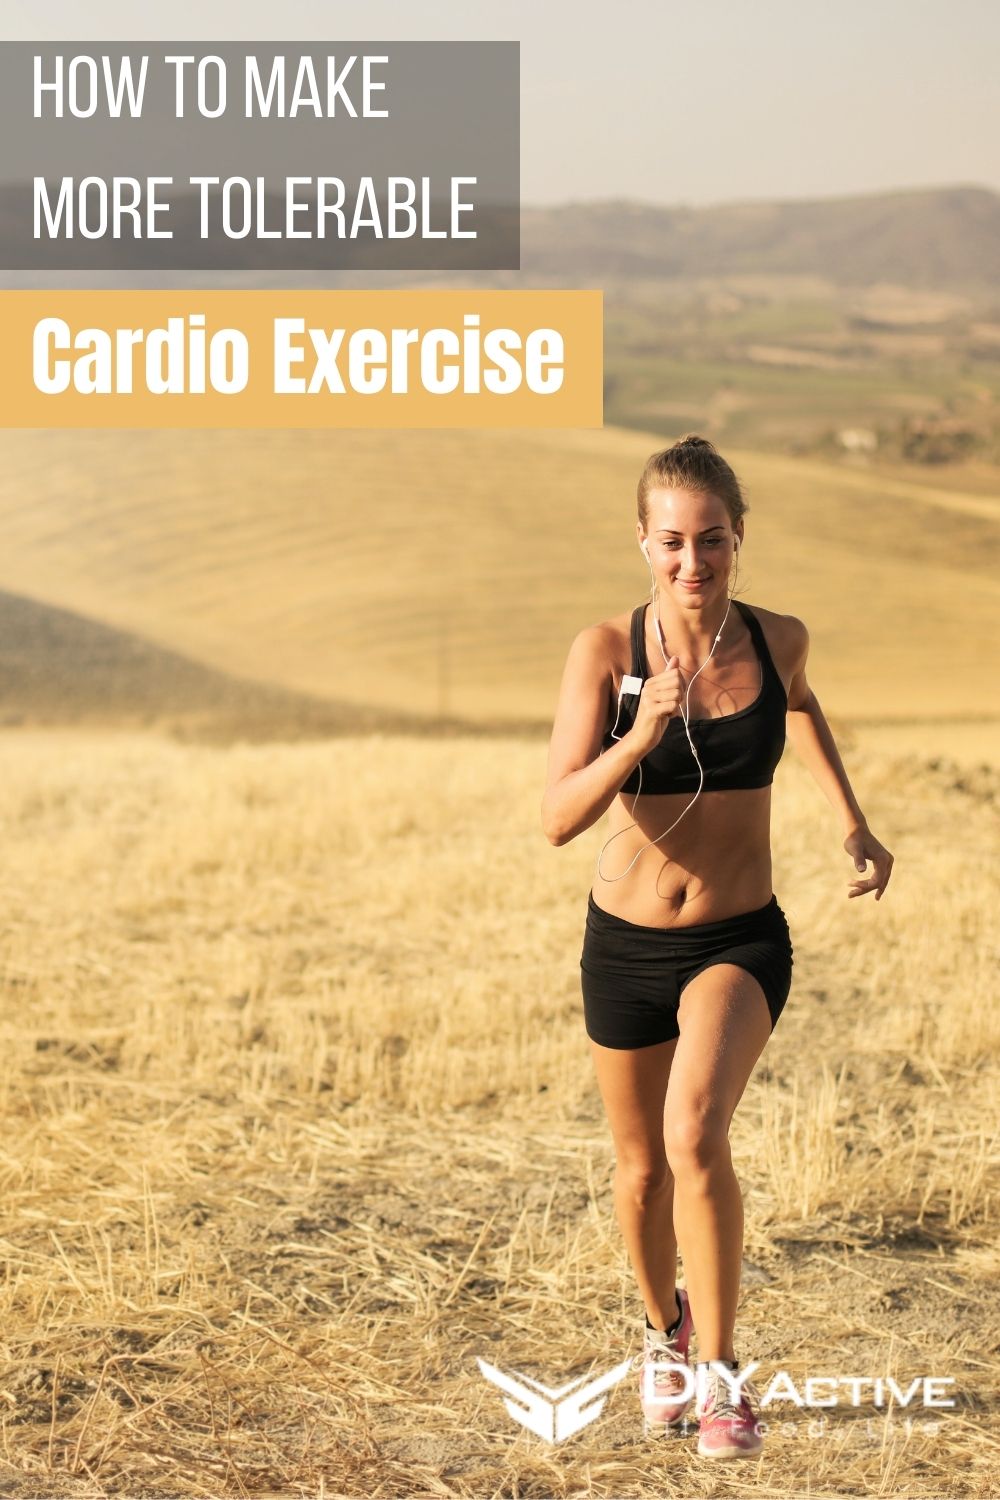 How To Make Cardio More Tolerable If You Can’t Stand It